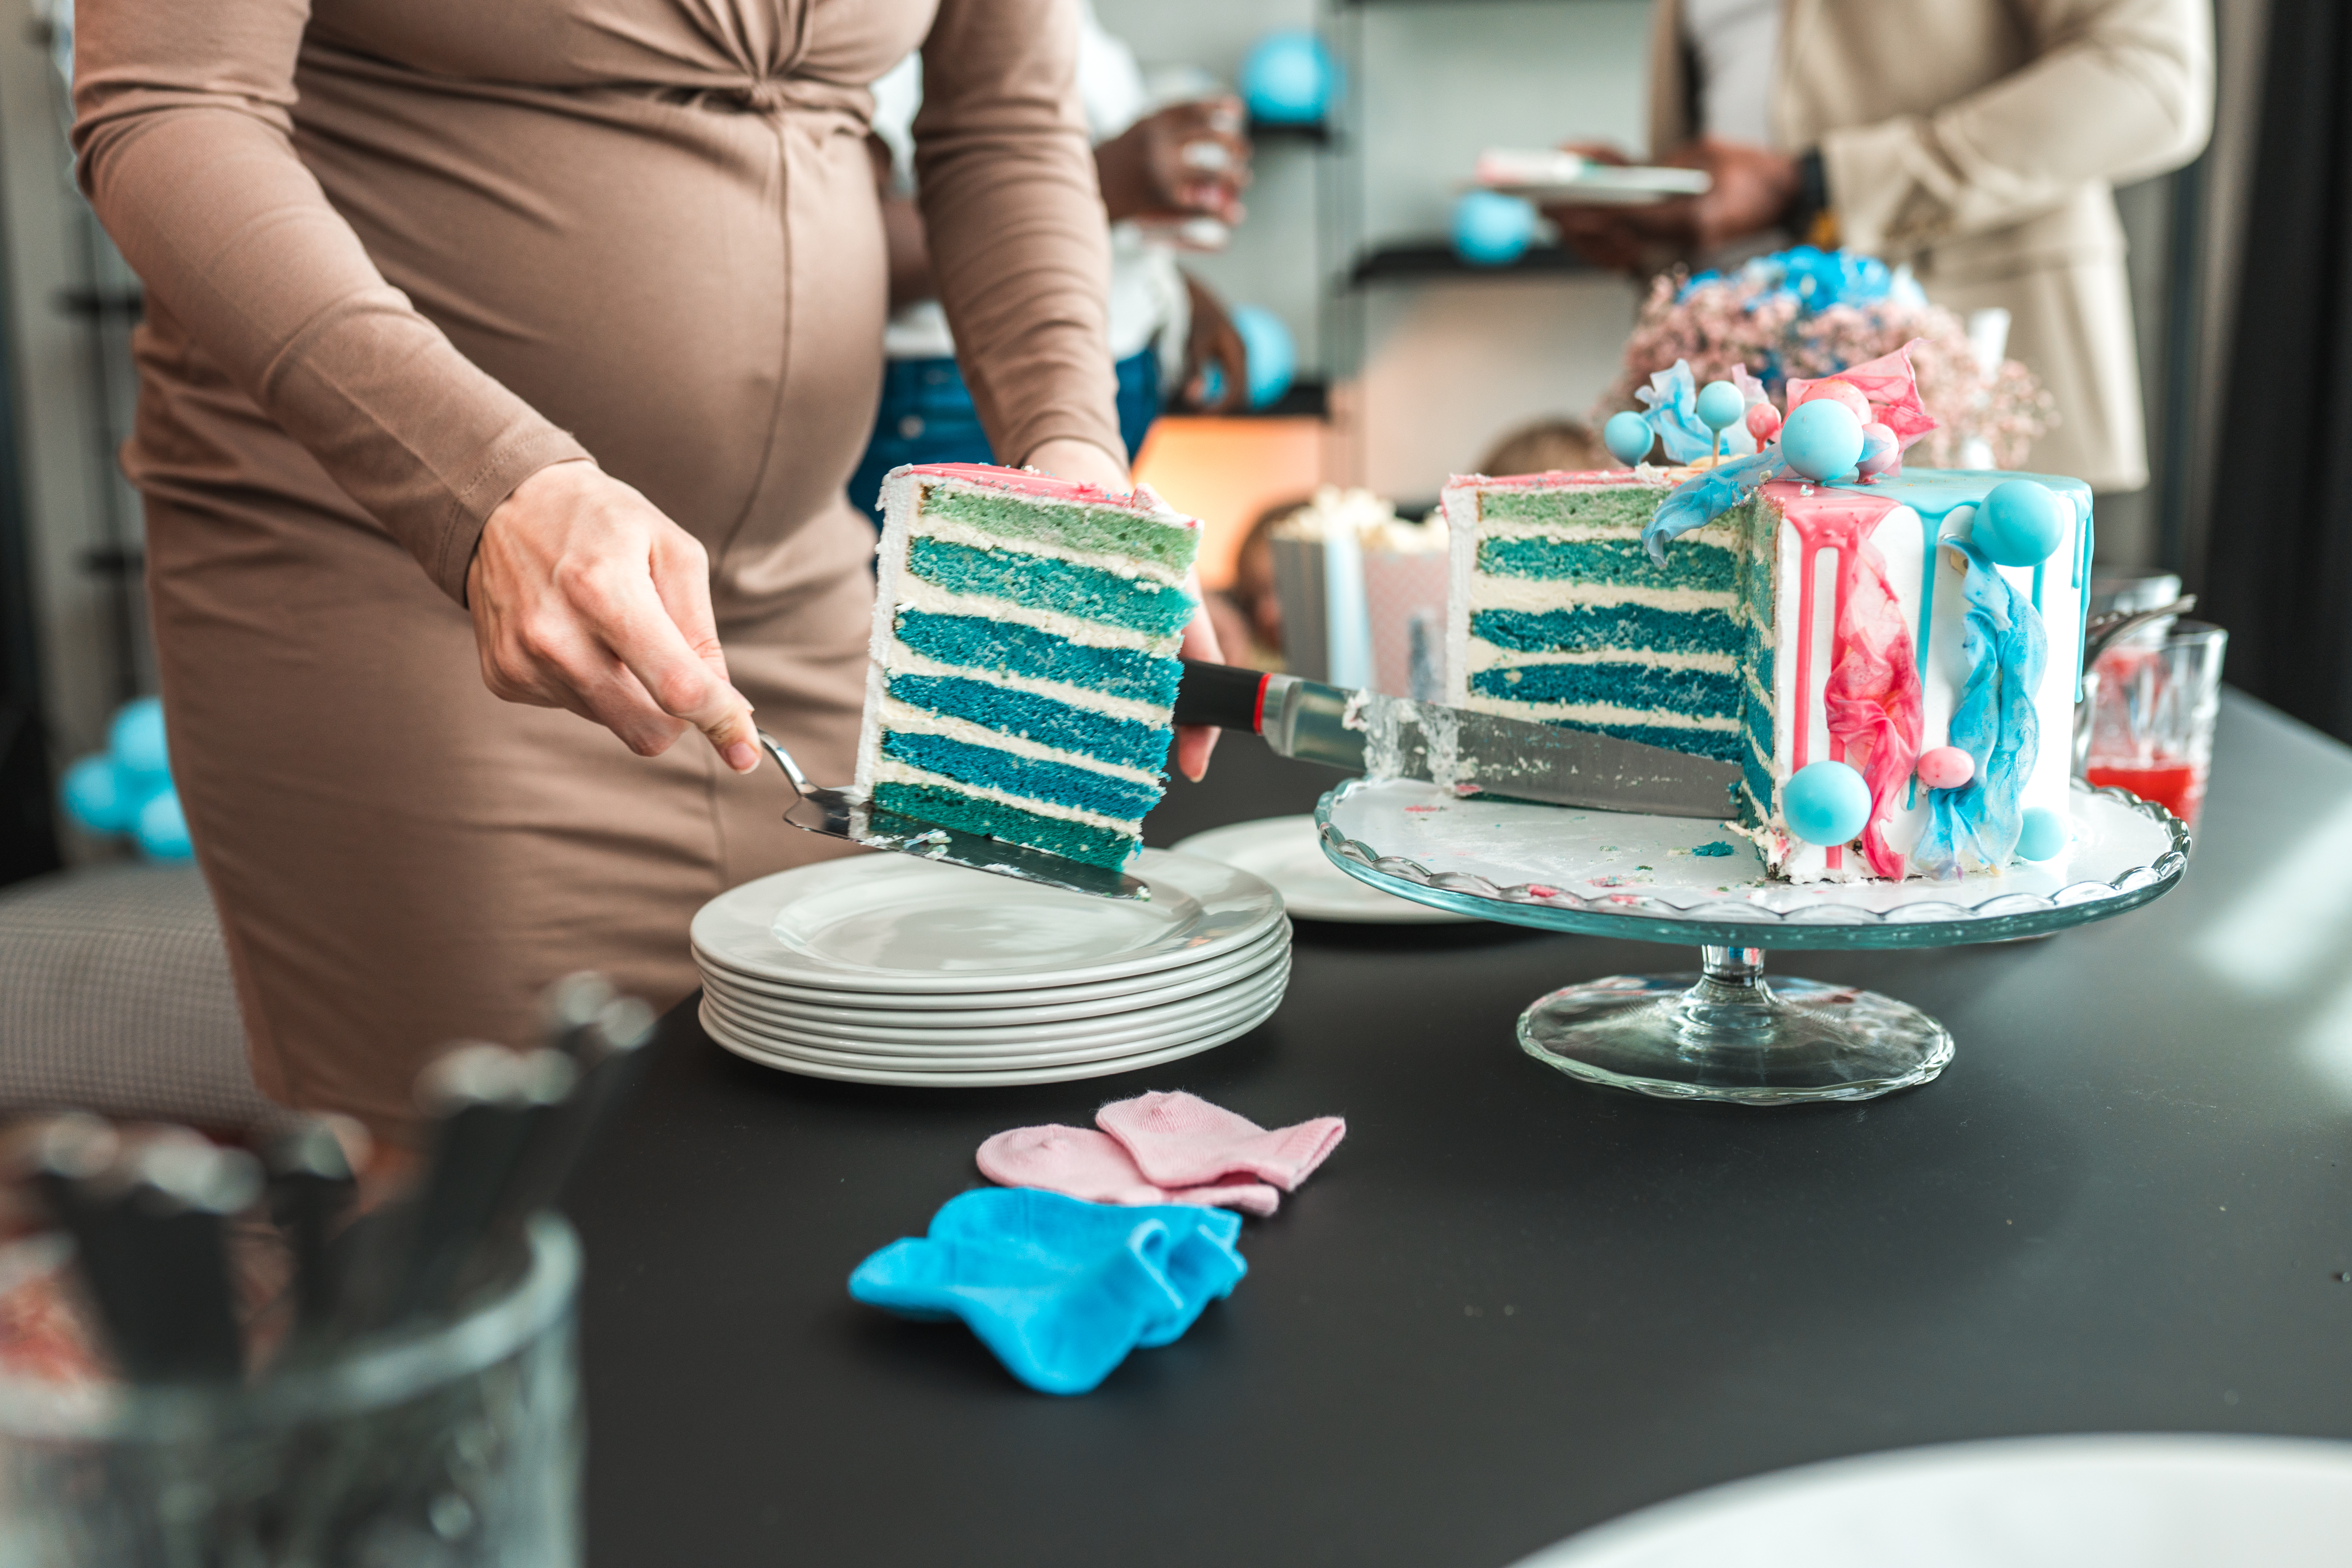 Blue surprise cake at a gender reveal party | Source: Getty Images